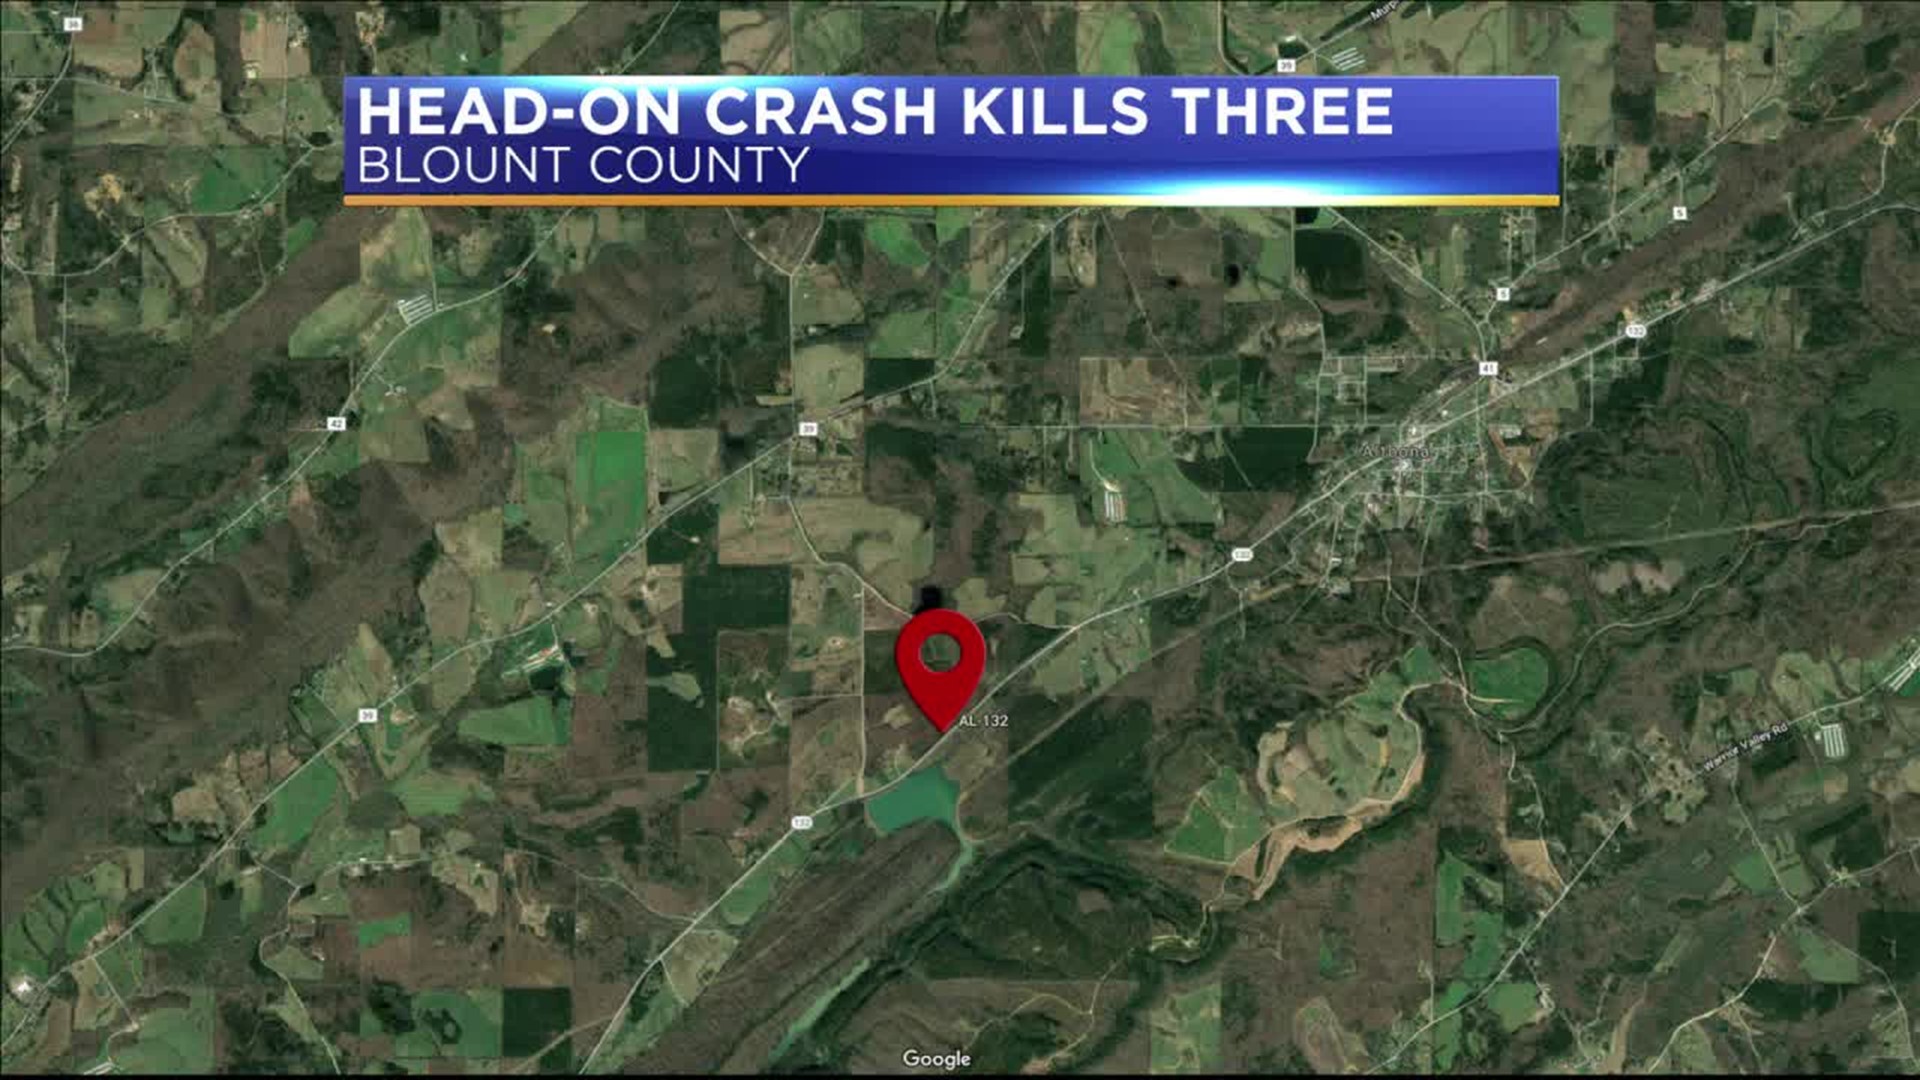 Three people were killed after a two-vehicle crash overnight/early Saturday morning in Blount County.